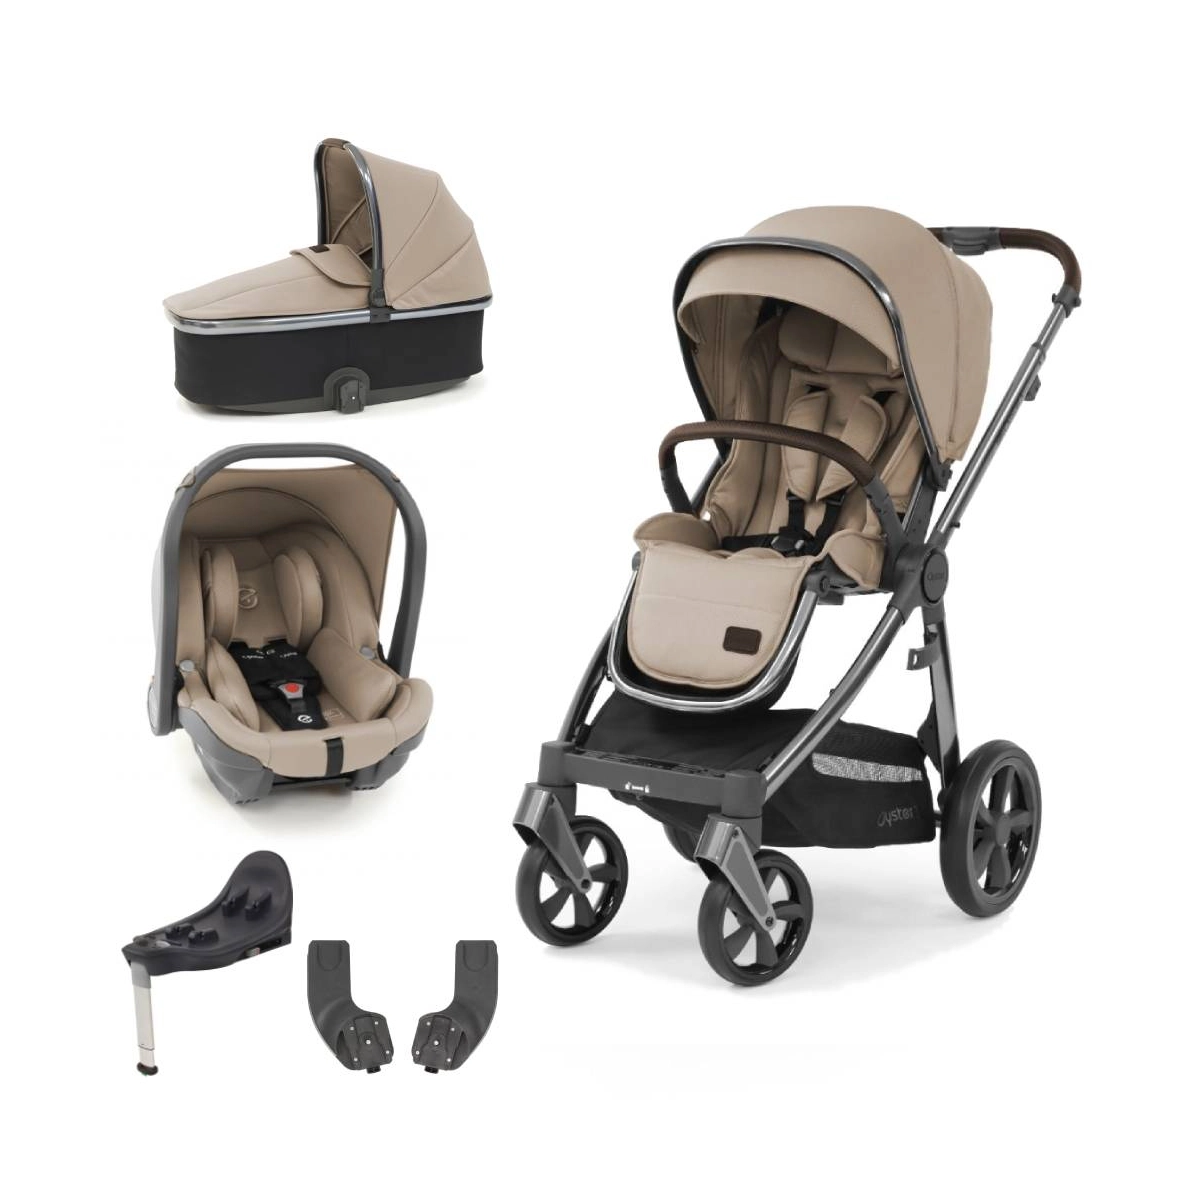 BabyStyle Oyster 3 Gun Metal Chassis Essential 5 Piece Travel System